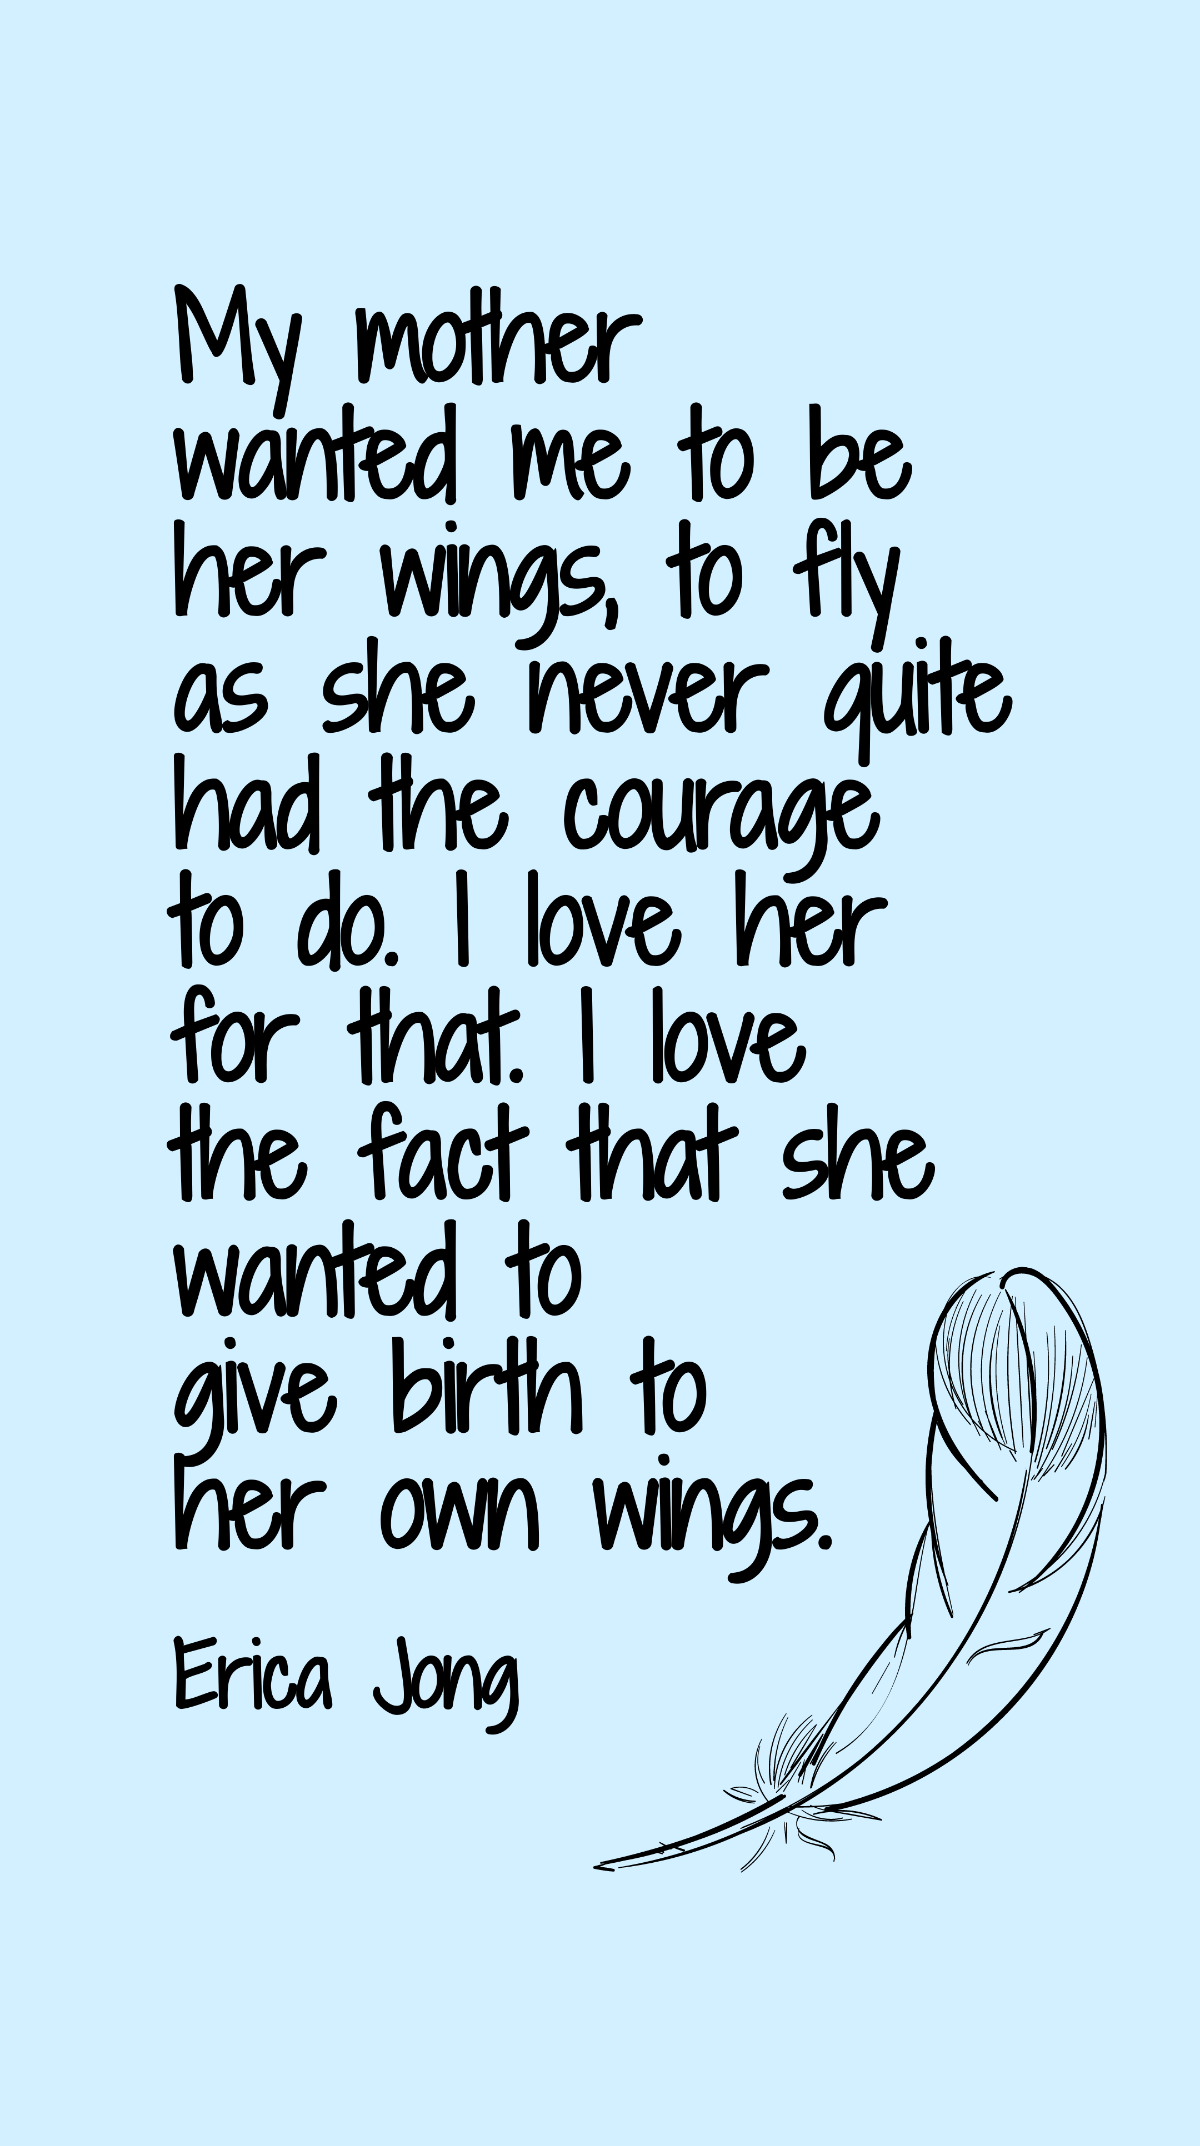 Erica Jong - My mother wanted me to be her wings, to fly as she never quite had the courage to do. I love her for that. I love the fact that she wanted to give birth to her own wings. Template